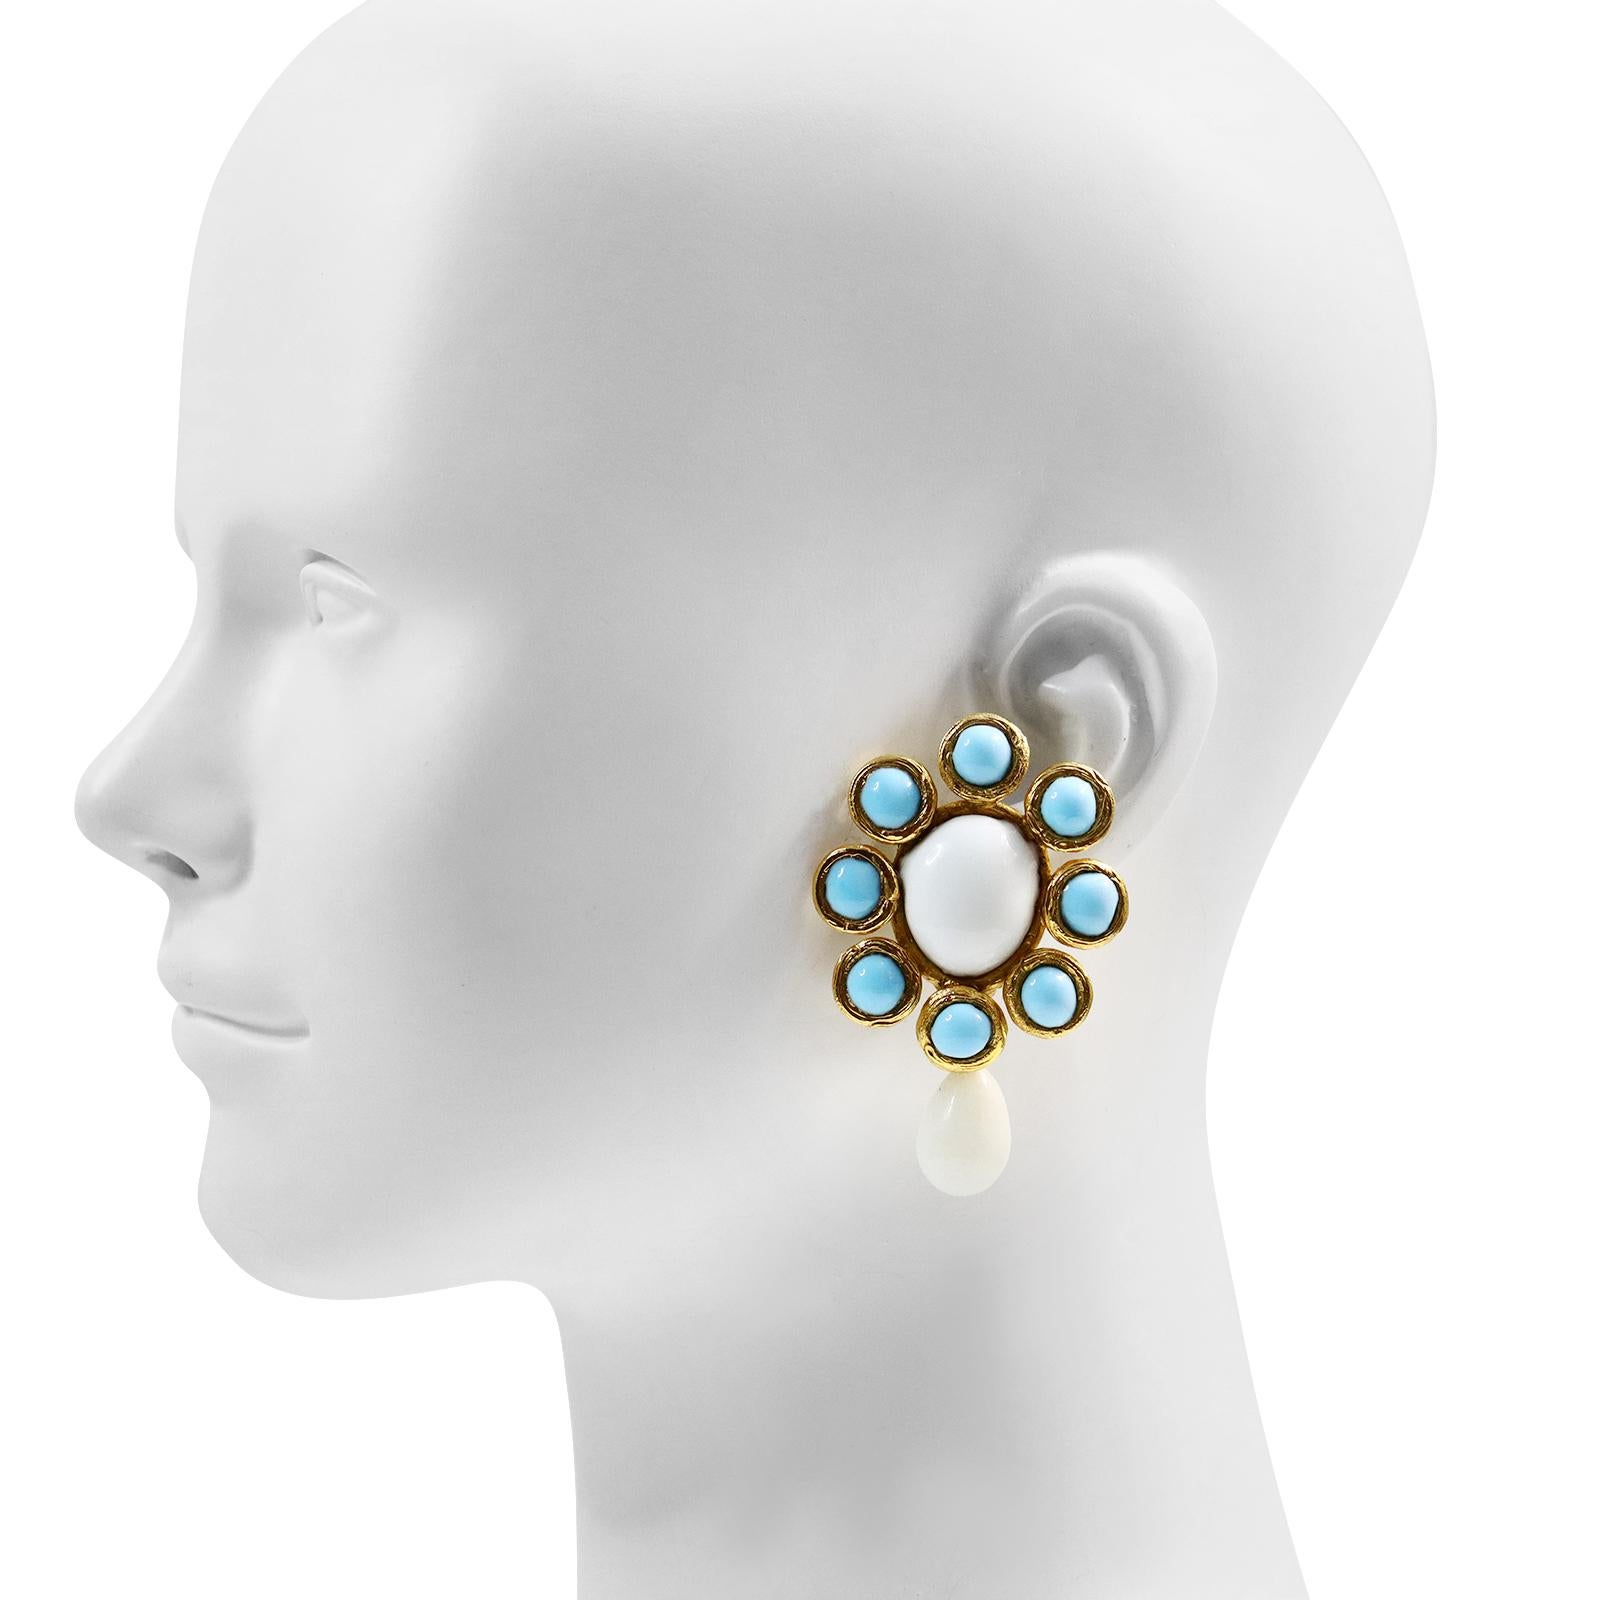 Maison Gripoix Vintage Faux Turquoise and White Dangling Earrings Circa 1980s In Good Condition For Sale In New York, NY